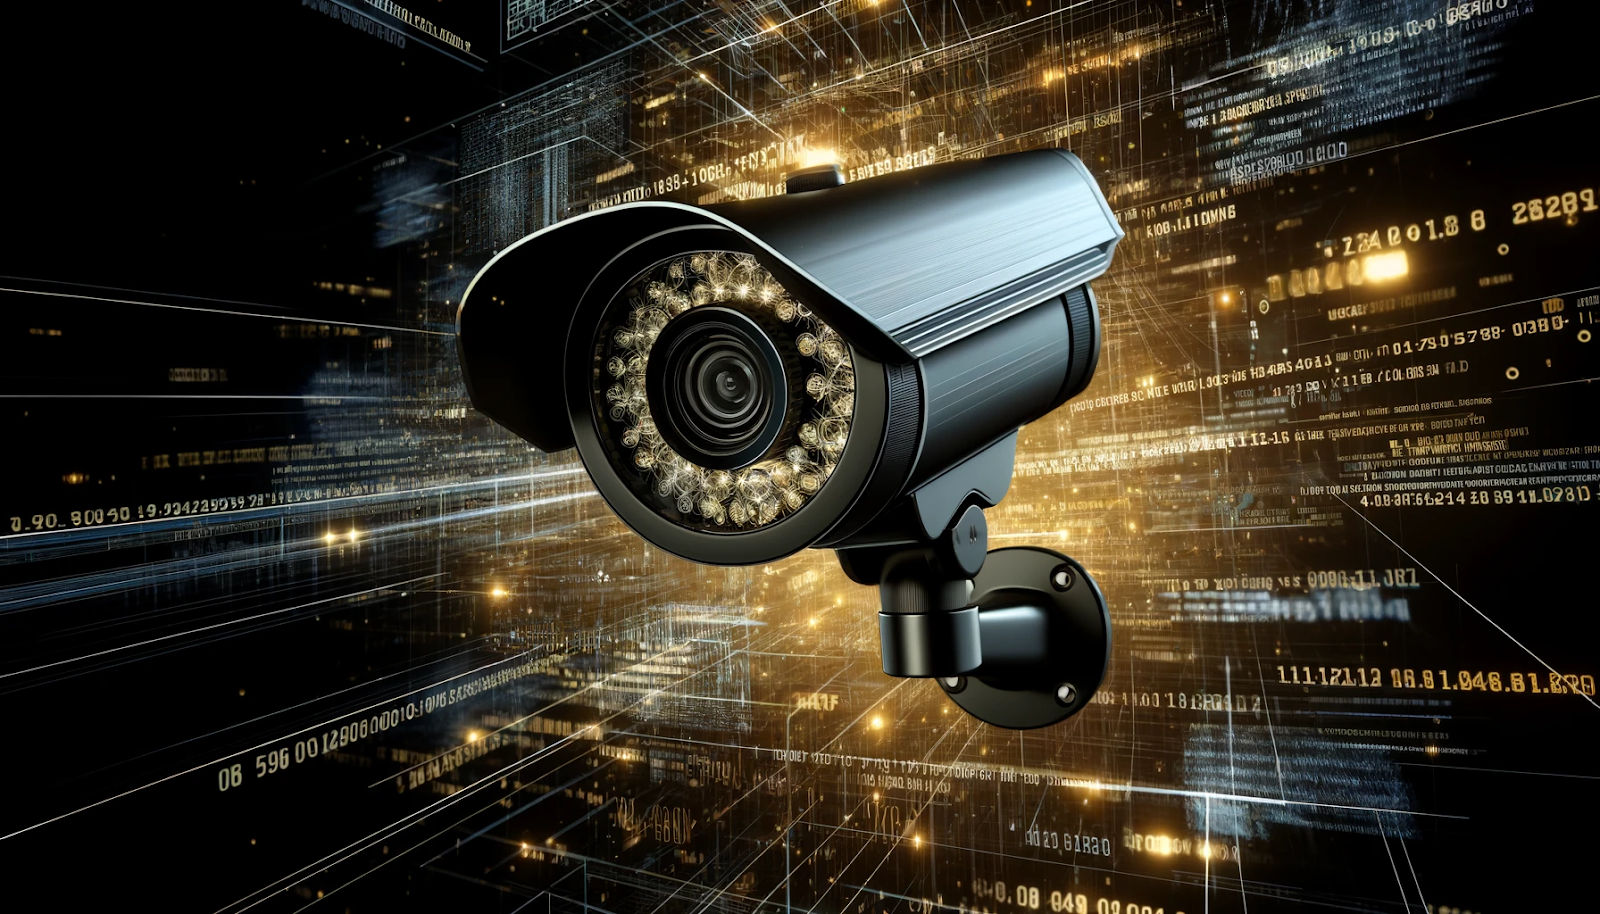 A photorealistic image showing a security camera interwoven with digital code patterns, representing the integration of physical security and cybersecurity.